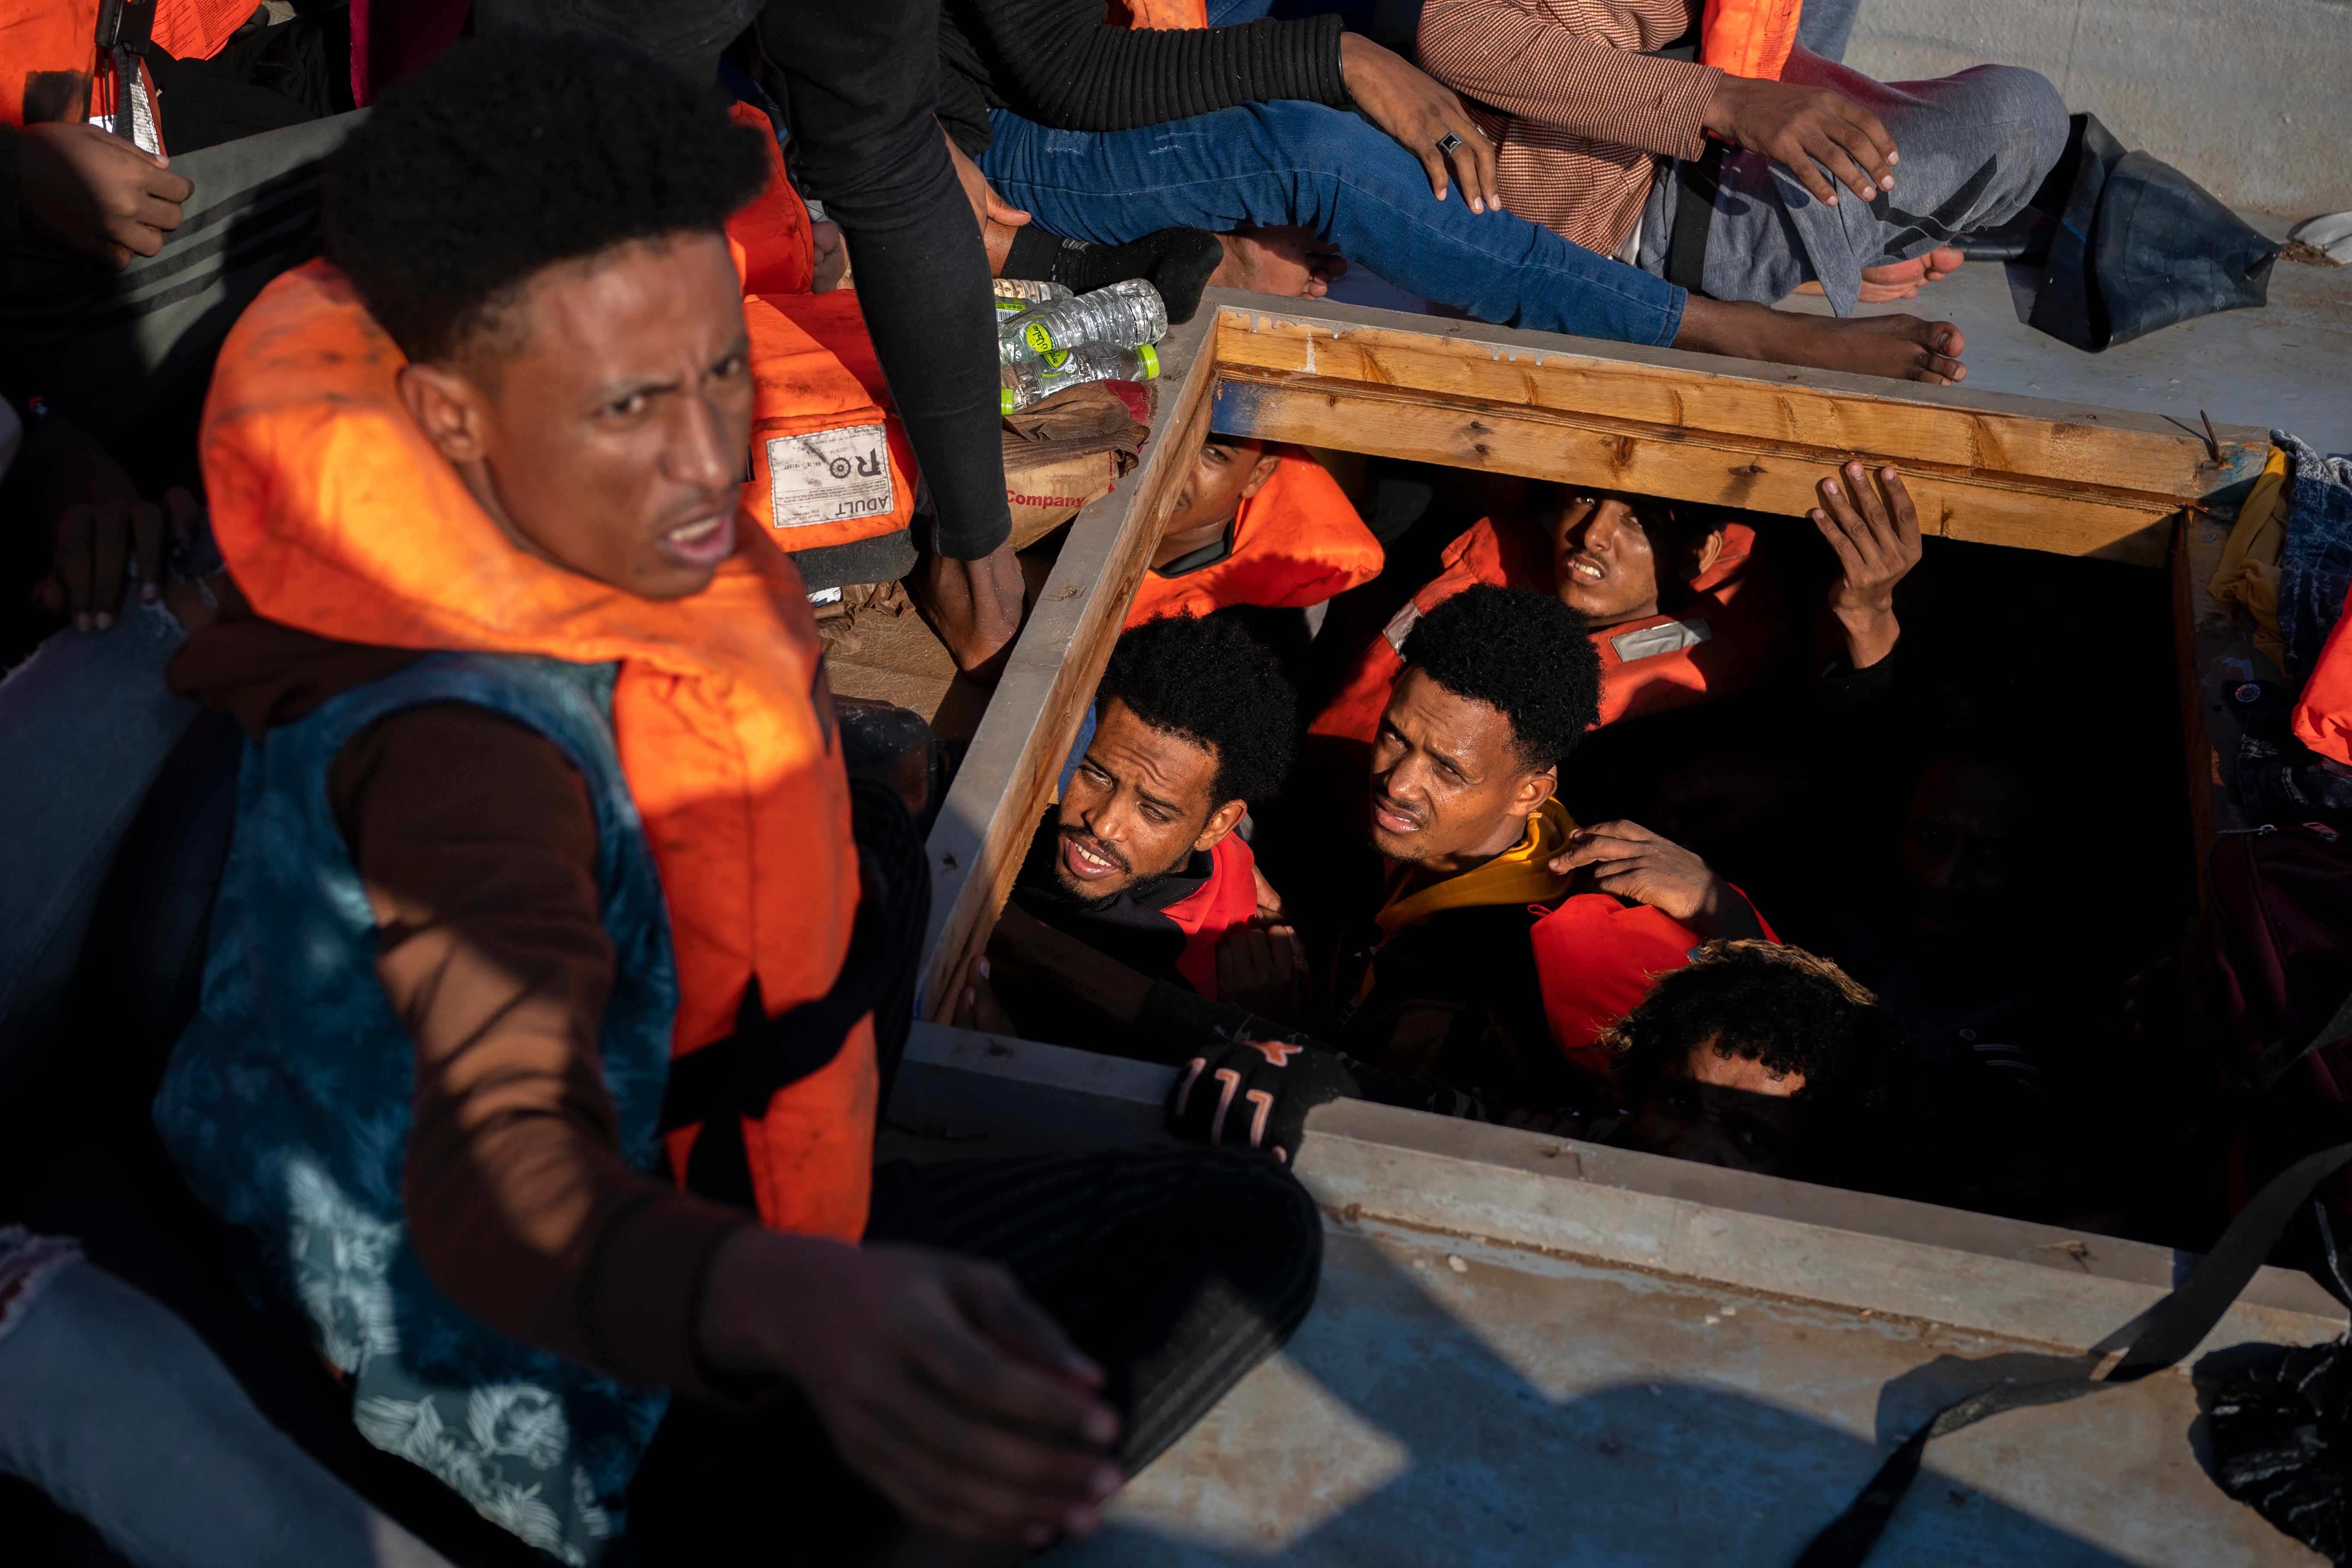 File image: Migrants from Eritrea, Libya and Sudan are crowded in the hold of a wooden boat before being assisted by aid workers